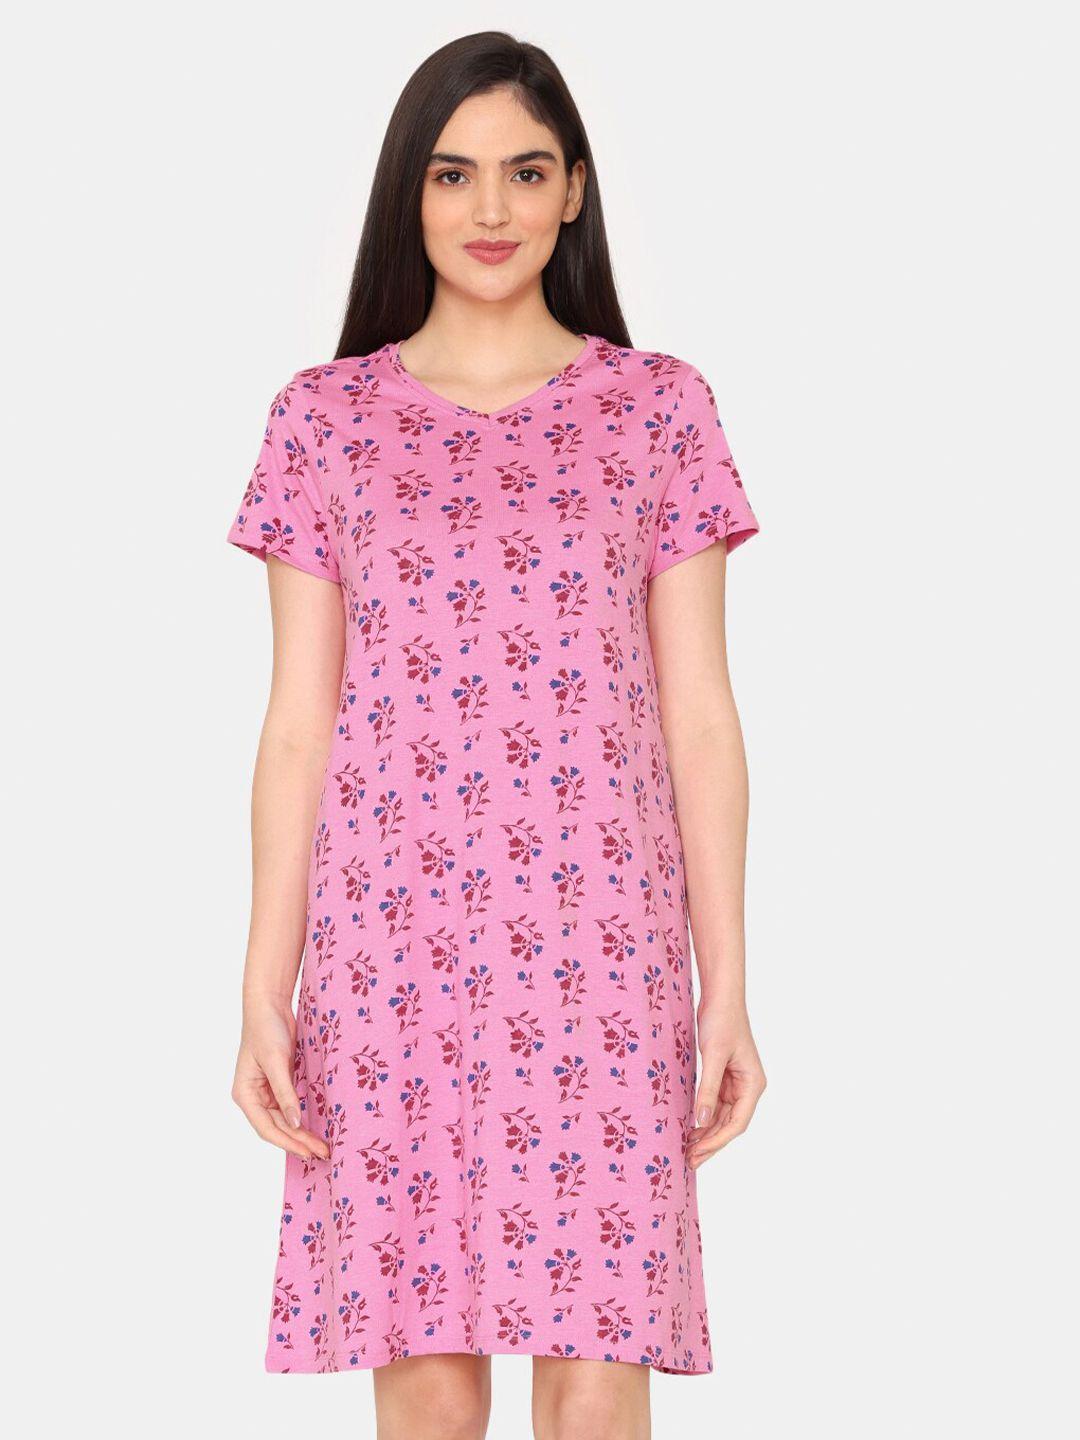 rosaline-by-zivame-floral-printed-t-shirt-nightdress